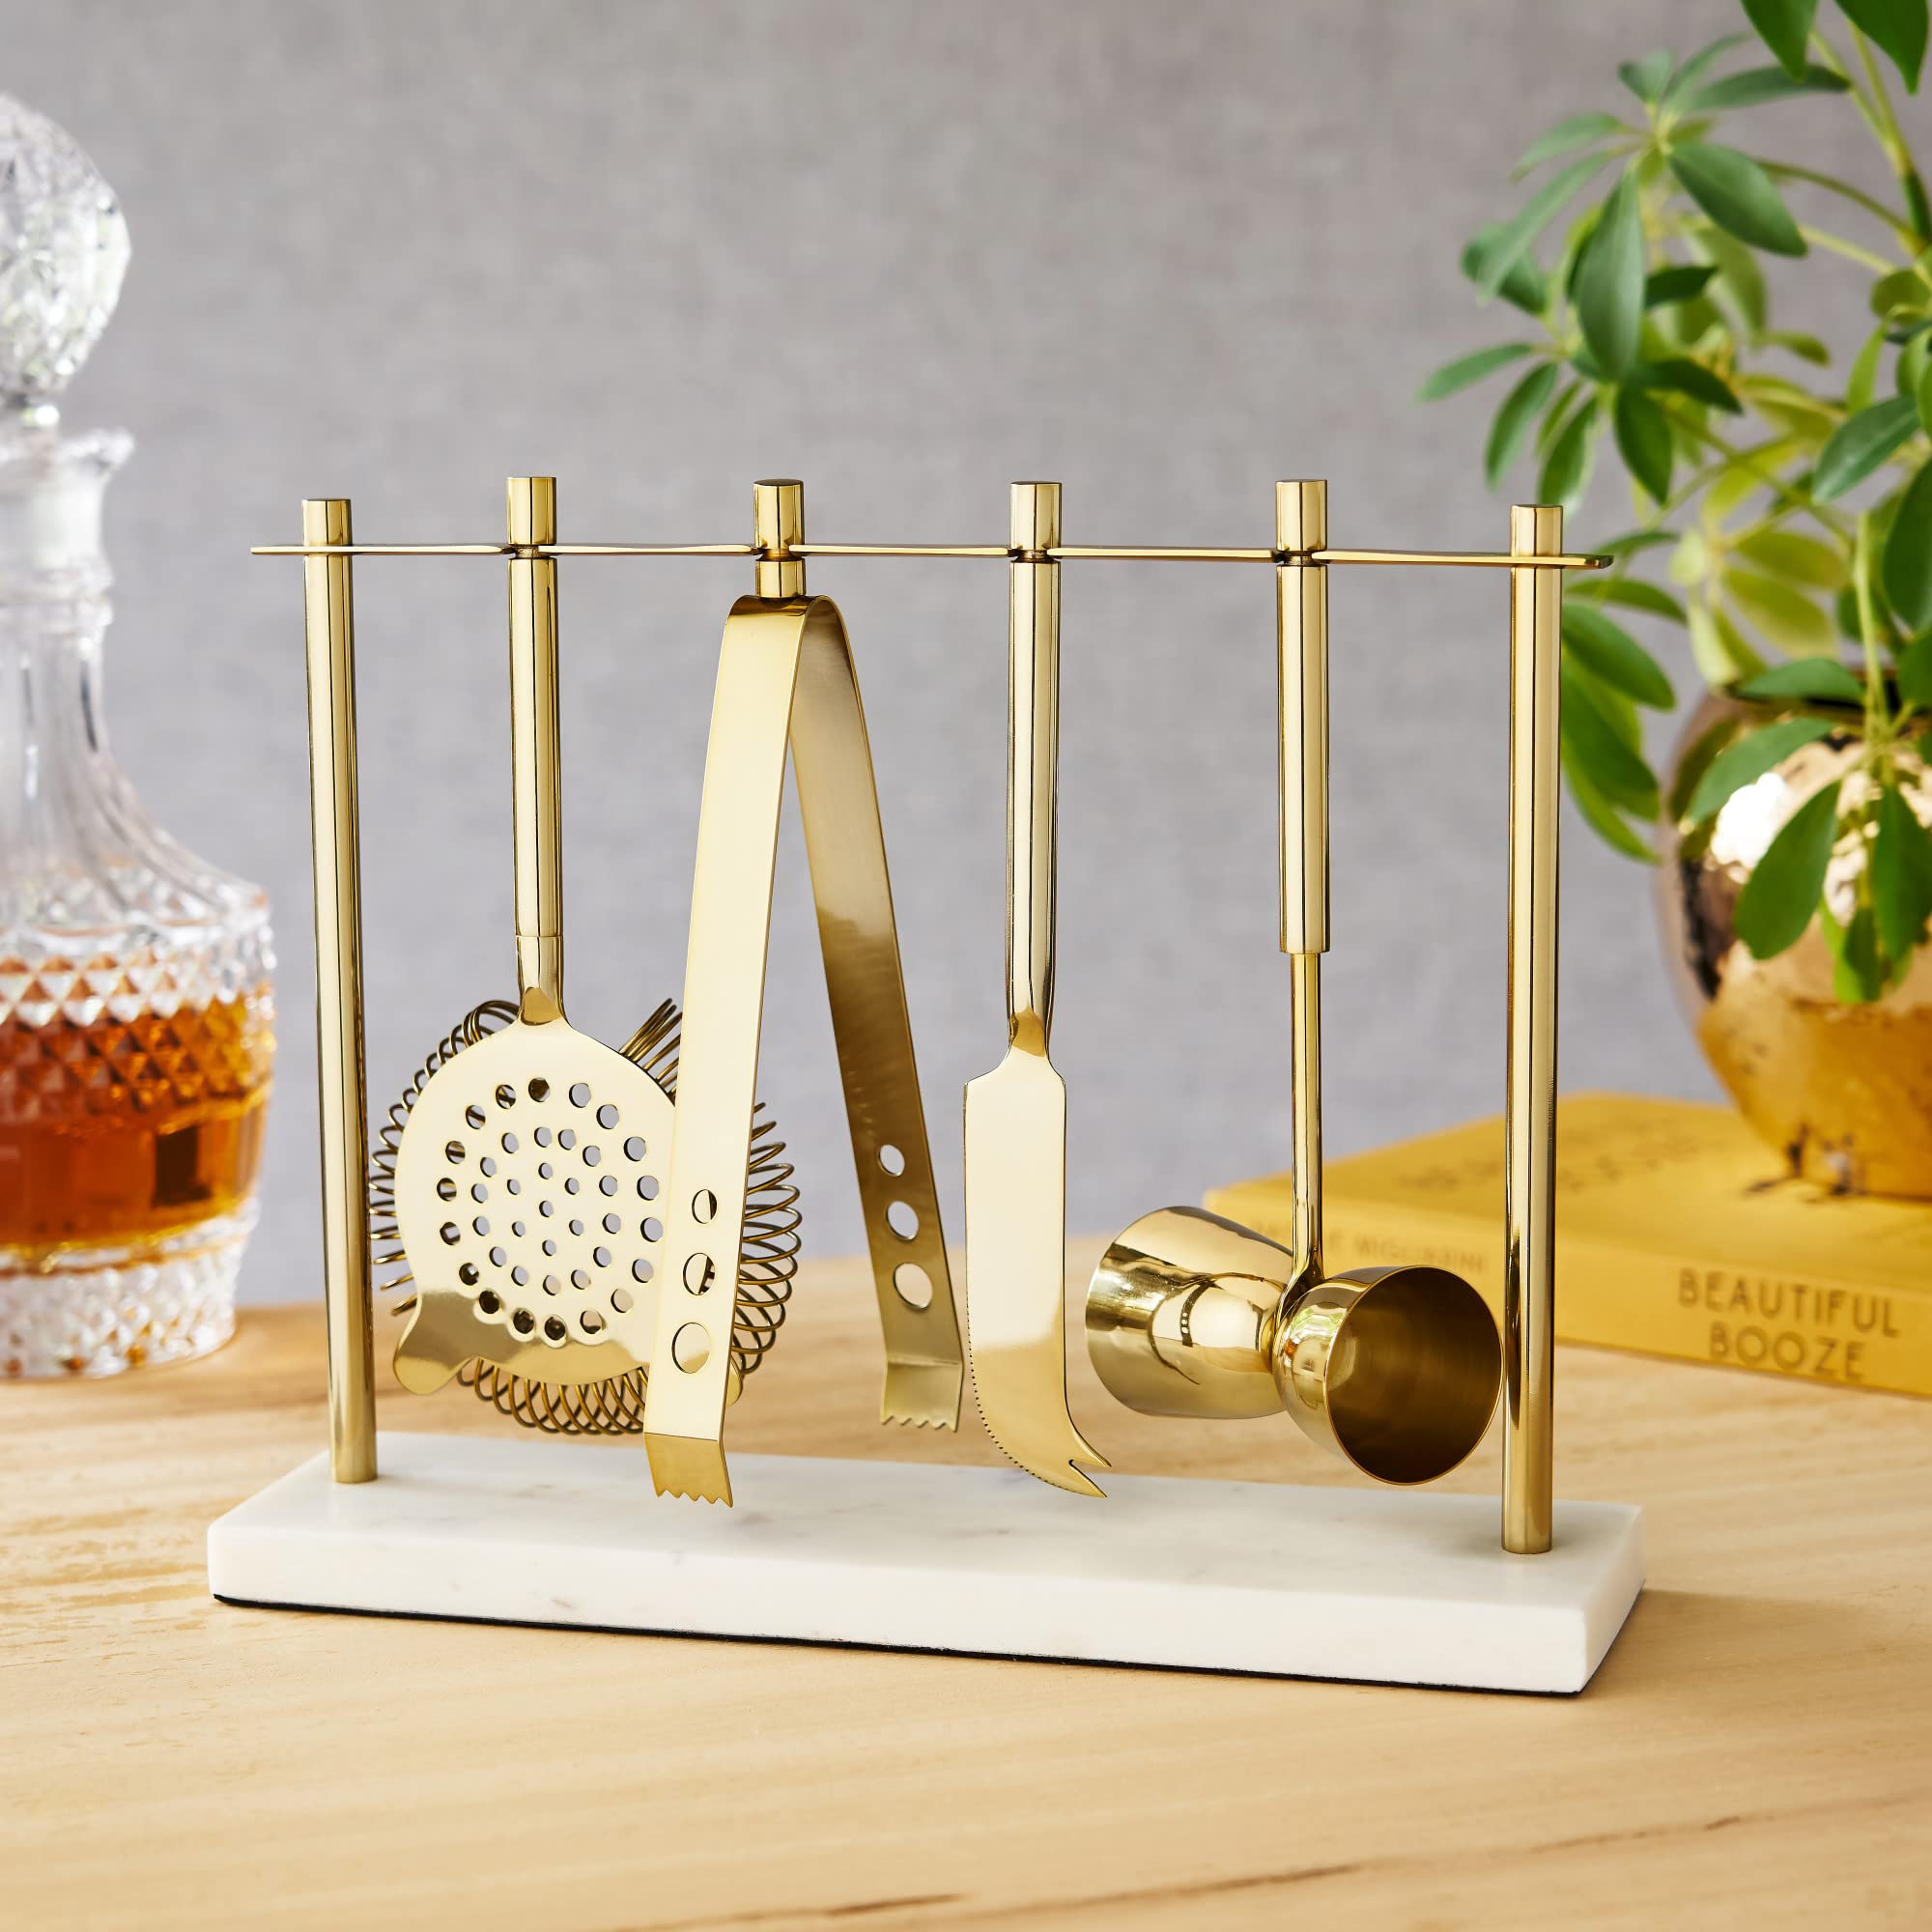 Twine Gold Barware Set, Hawthorne Strainer, Citrus Knife, Ice Tongs, Double Jigger, Marble Stand, Stainless Steel with Gold Finish, Set of 4